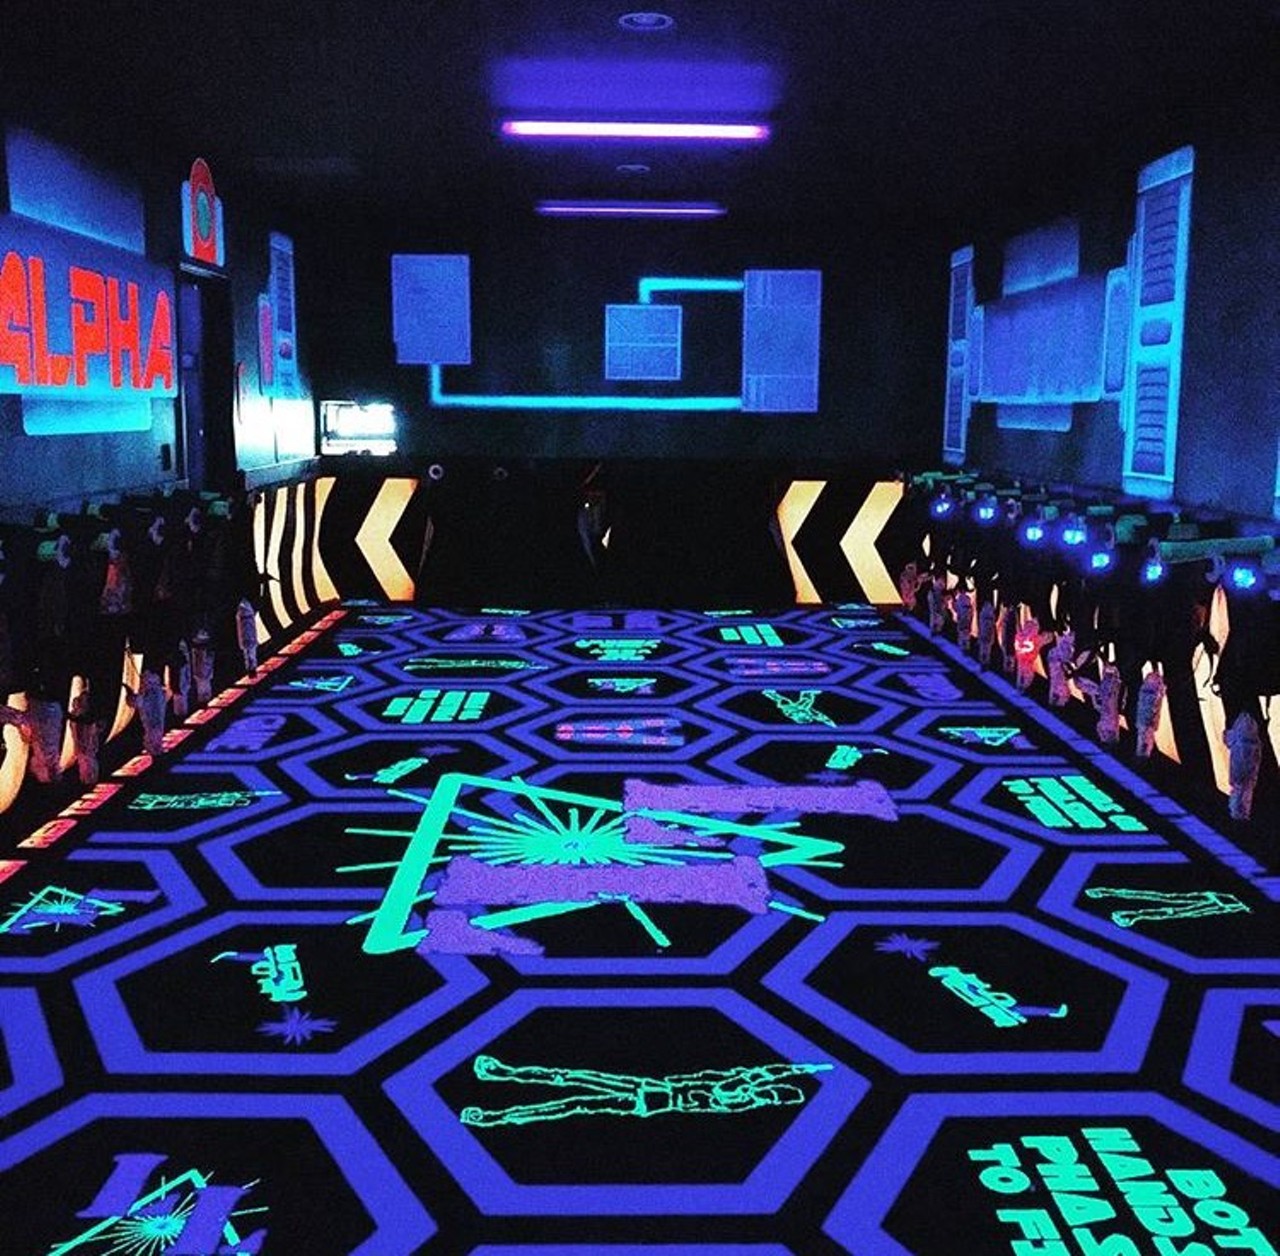 Laser Legend
7505 N Loop 1604 East #101, (210) 444-9025, laserlegend.com
Competitive families can test out their battle skills in an obstacle filled black light arena or enjoy an arcade decked out with the new and vintage games.
Photo via Instagram / laserlegend